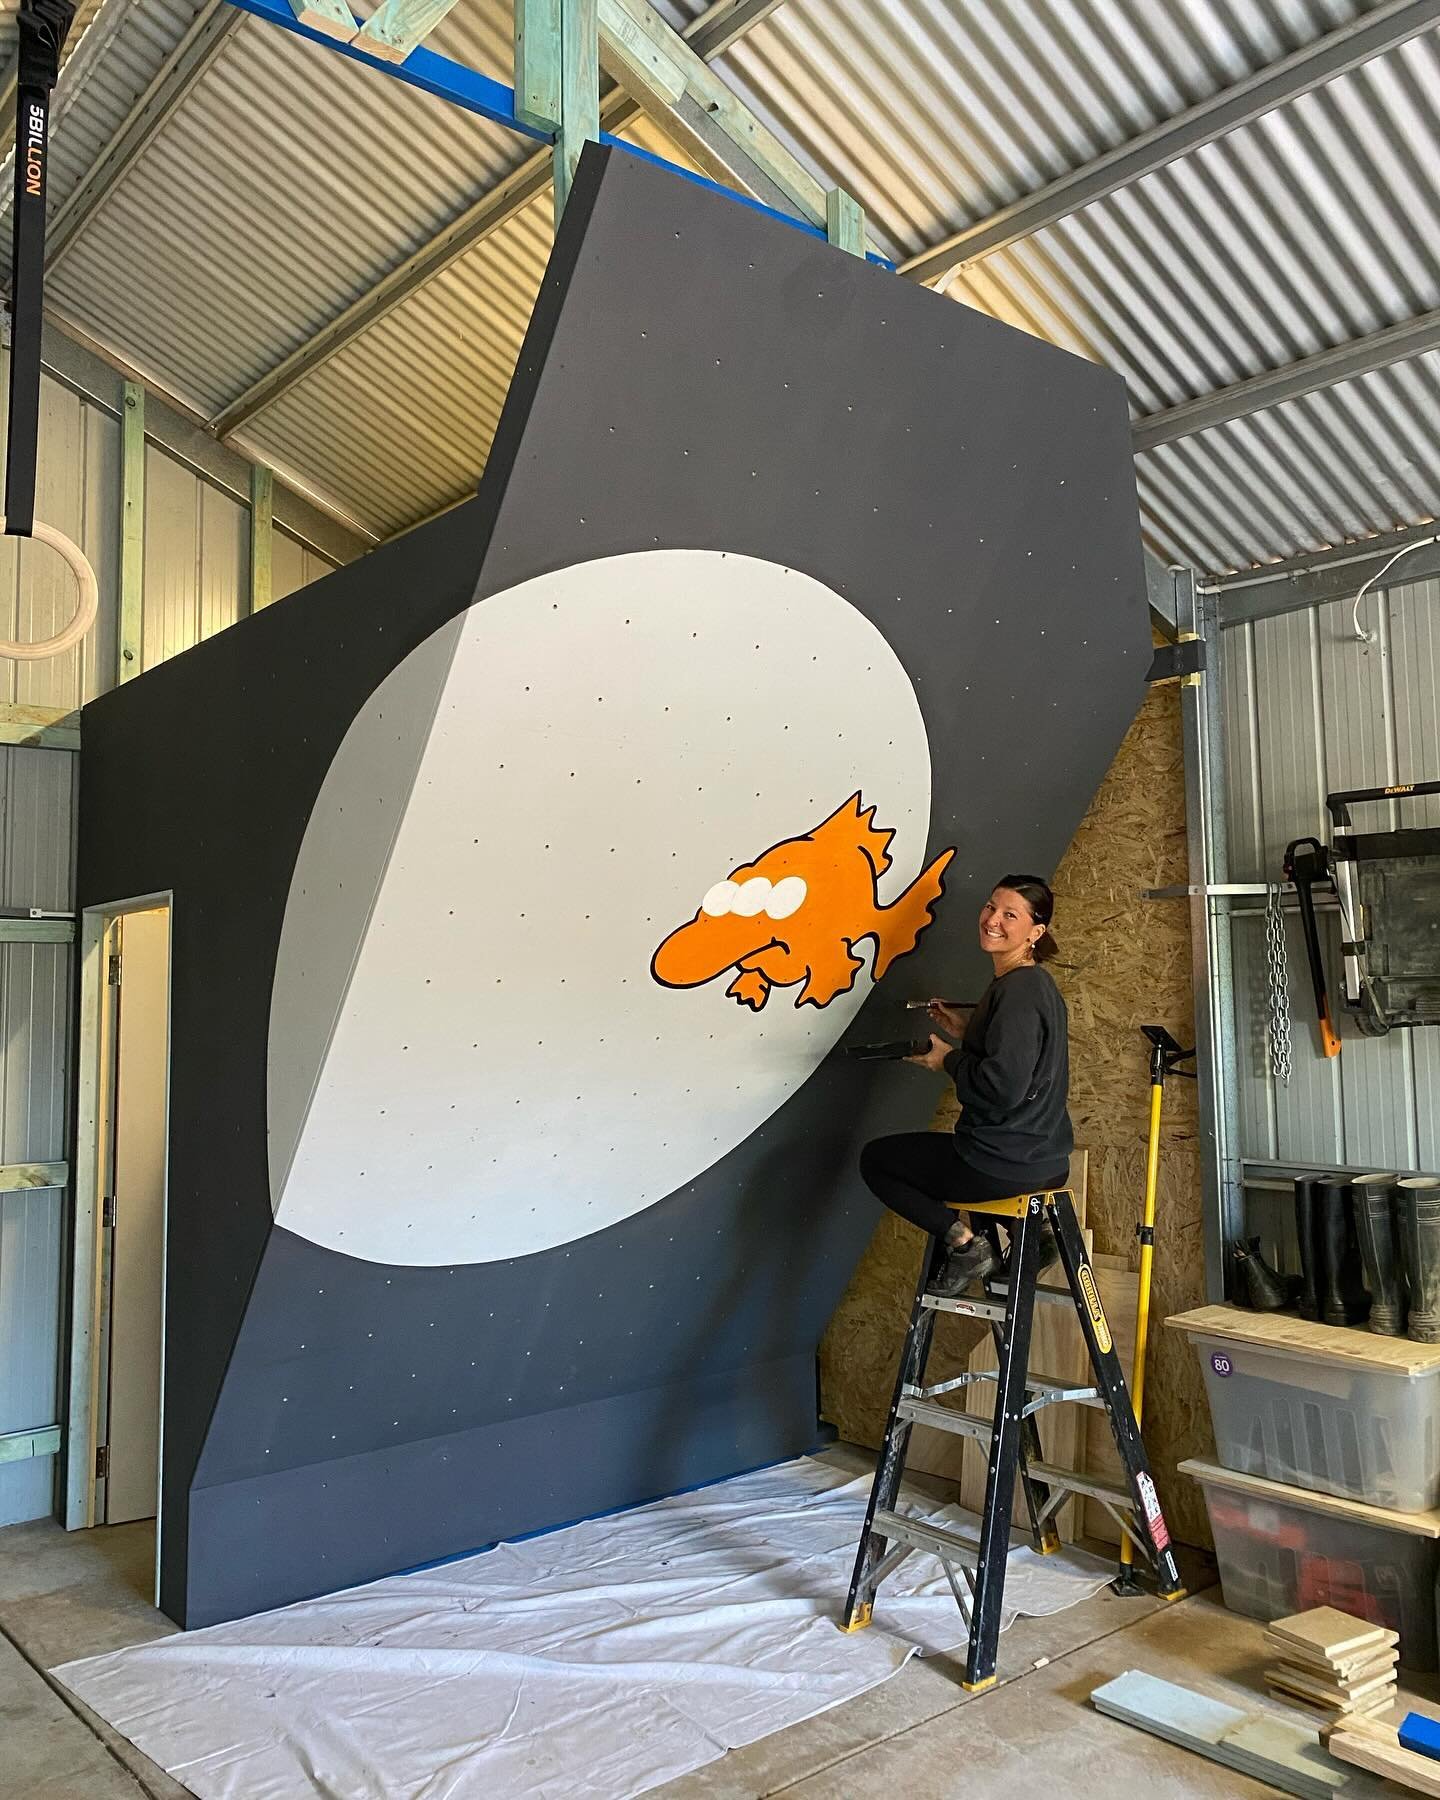 Can I count this as my first mural? 😬
Scroll to see it finished. 
🔨: @stewthomas 
🎨: me

#homeboulderingwall #lifeingeelong #bouldering #climbing #homegymsetup #shedlife #blinky #simpsons #mural